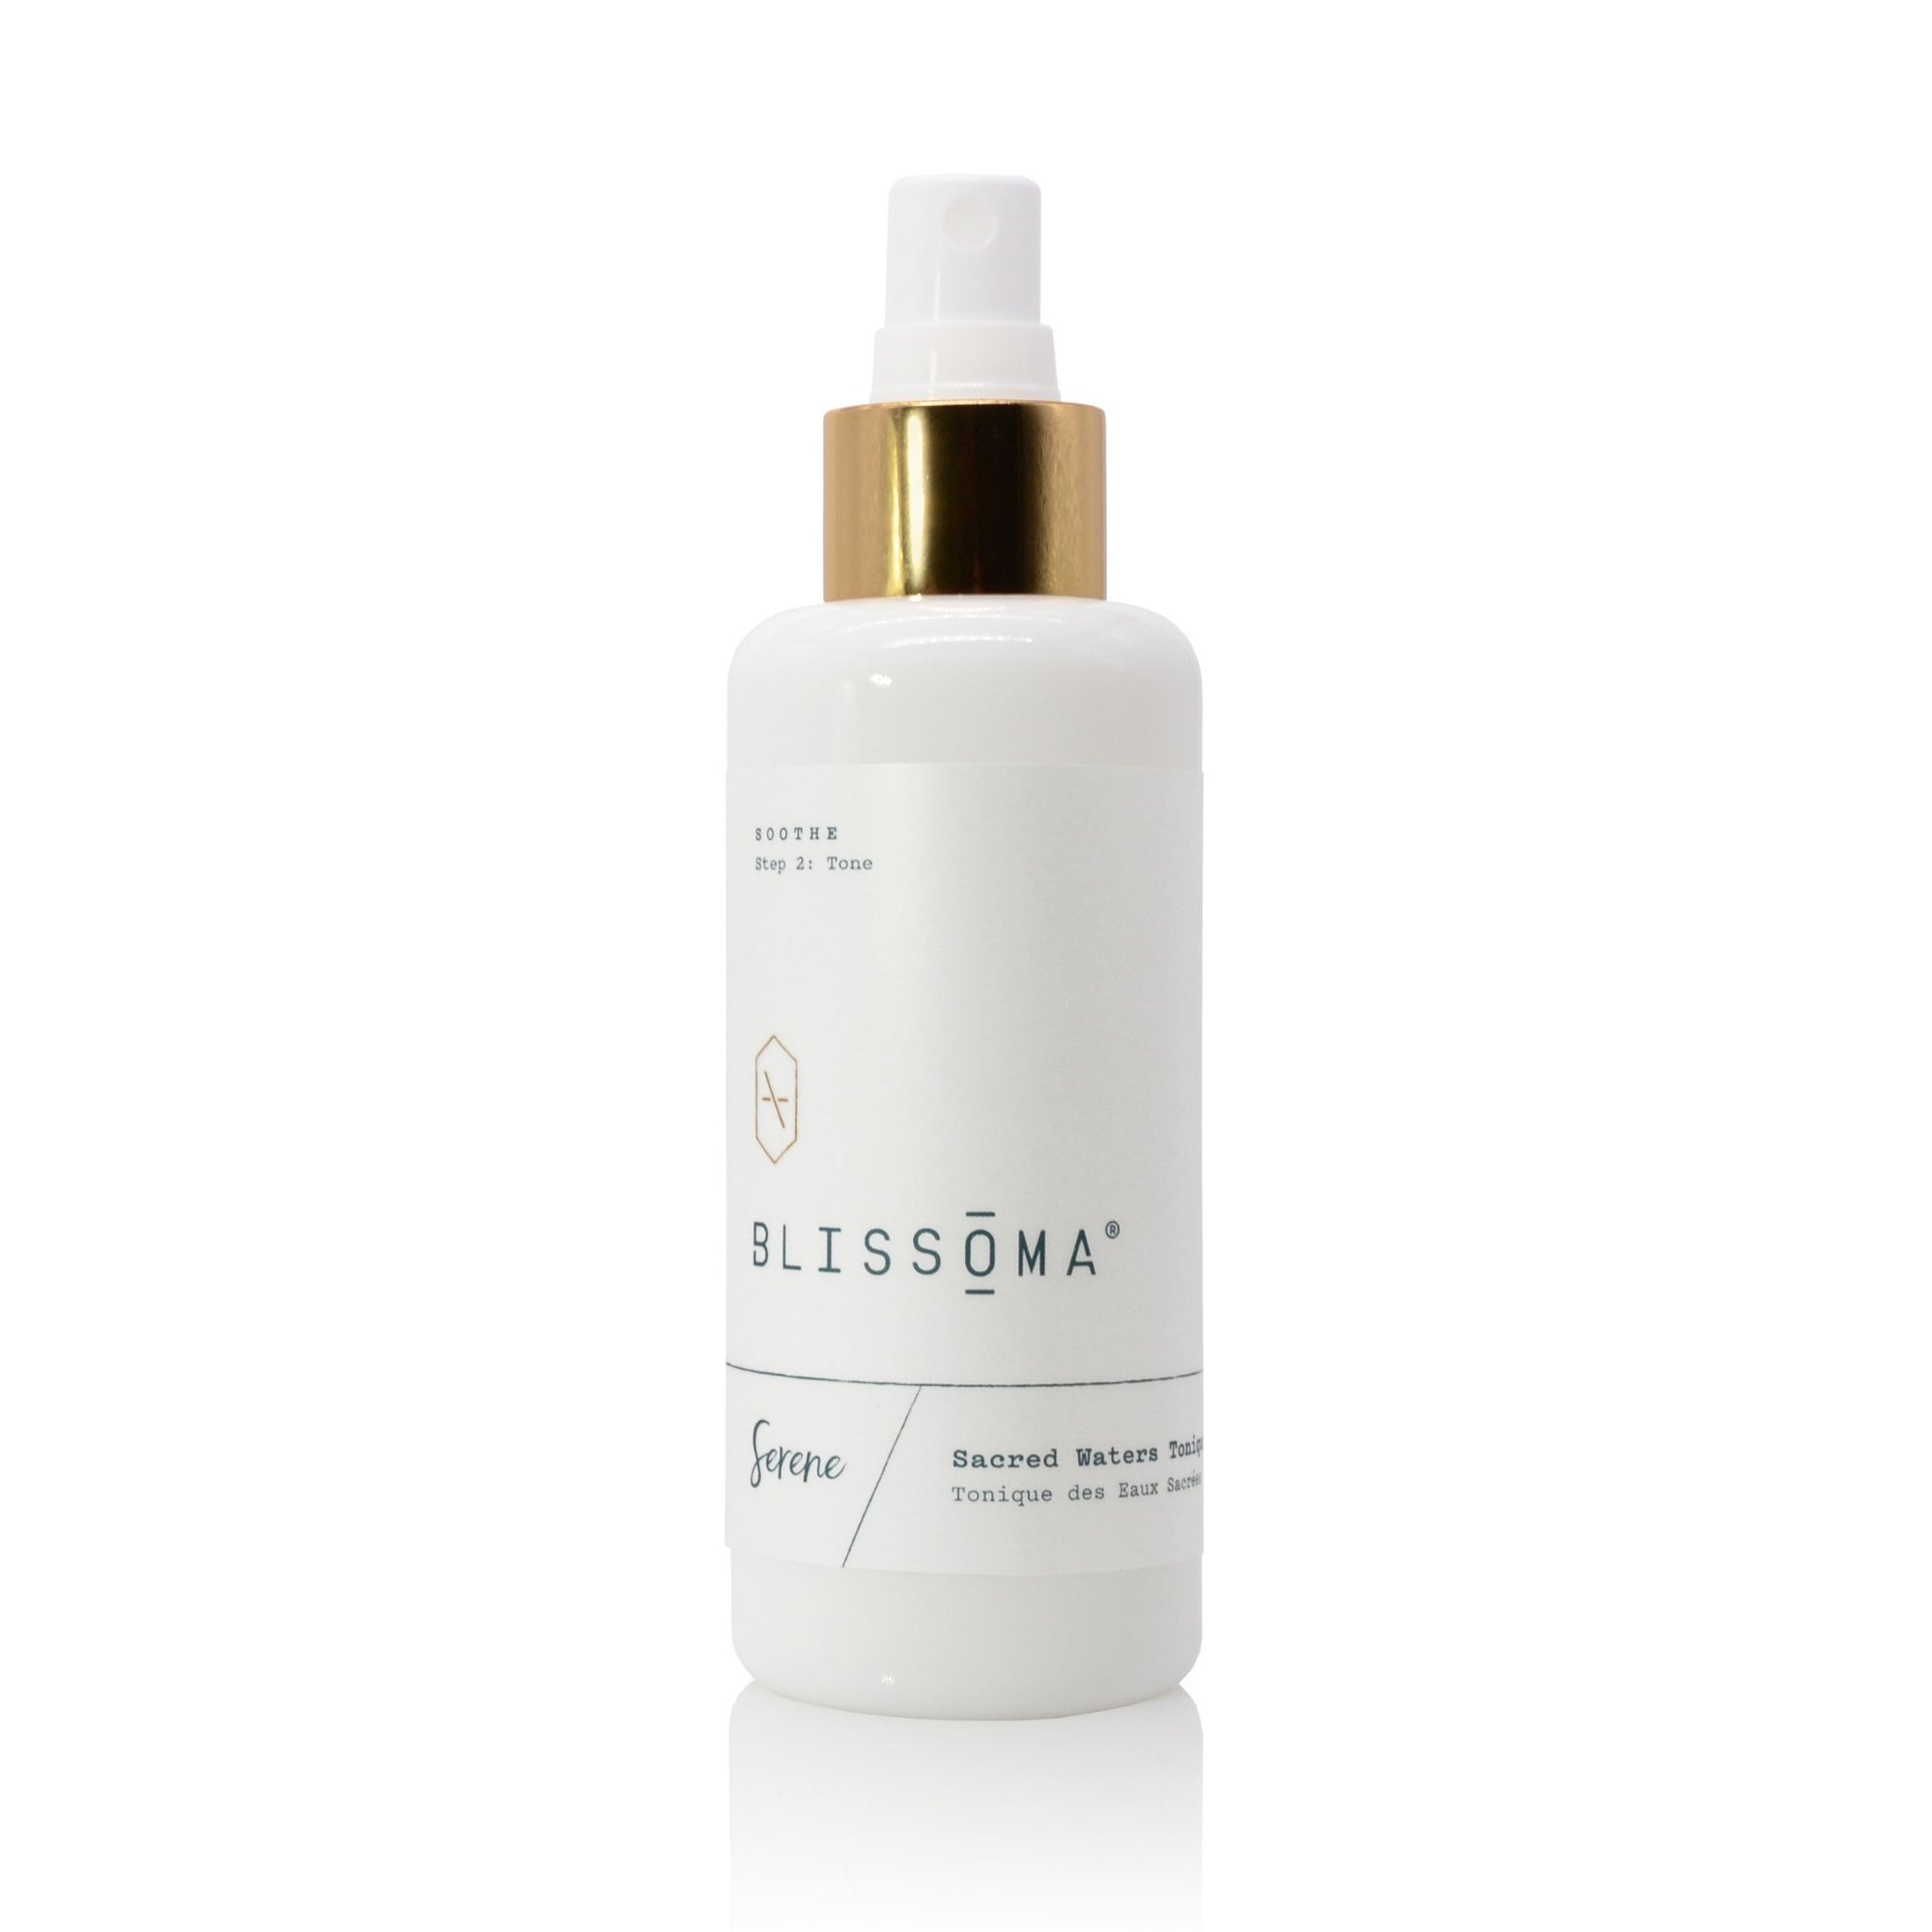 Blissoma - Blissoma Serene Sacred Waters Tonique - ORESTA clean beauty simplified